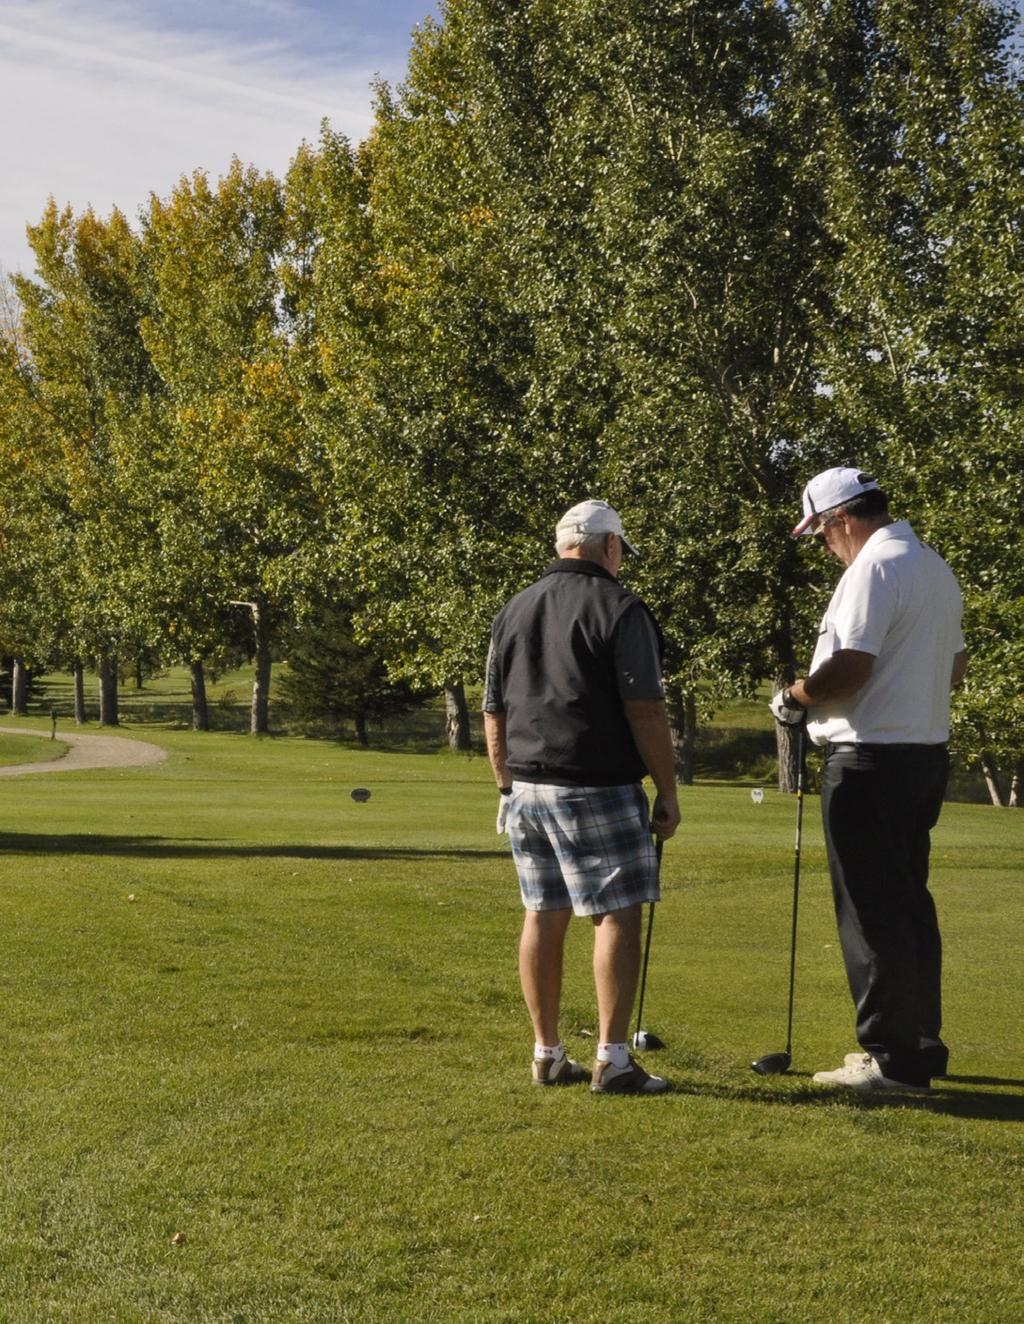 26th Annual Olds College Fall Golf Classic September 12th, 2018 Bronze Sponsors $1,250 Cash sponsor Hole sponsors (14 available) Lunch sponsors (3 available) Coffee